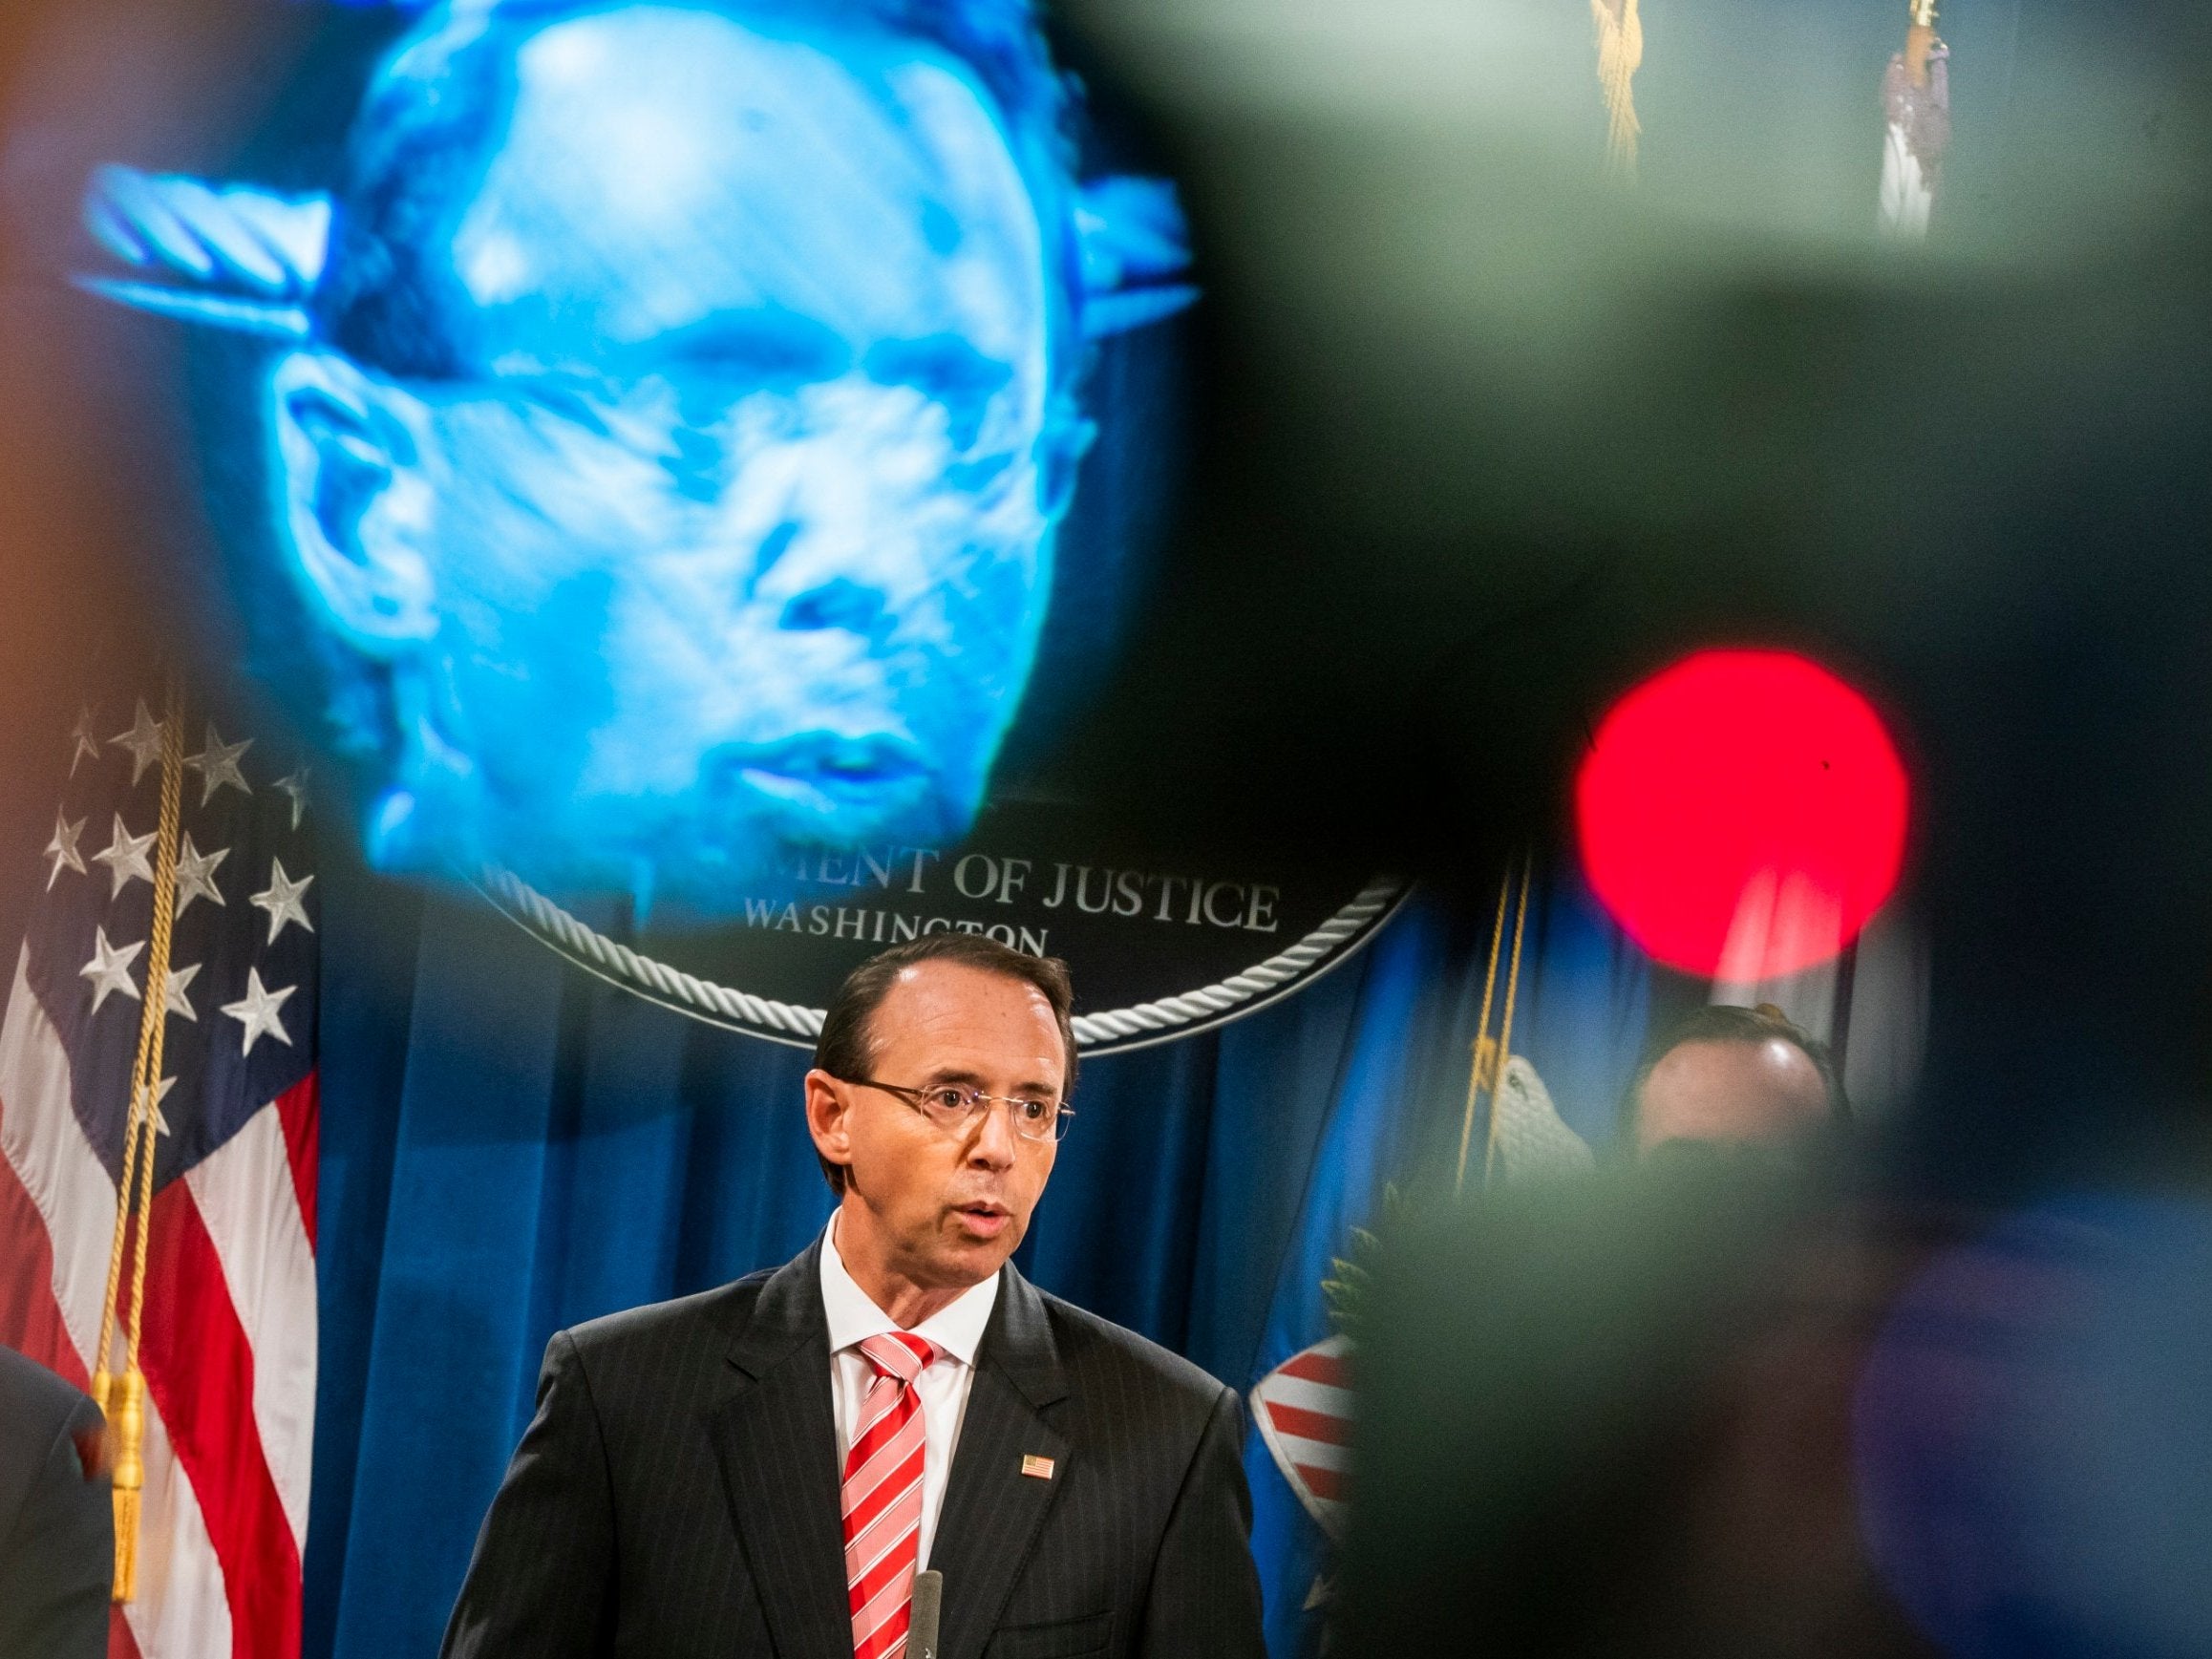 The House is scheduled to leave for a five-week recess on Thursday, potentially delaying any vote on Rod Rosenstein's future